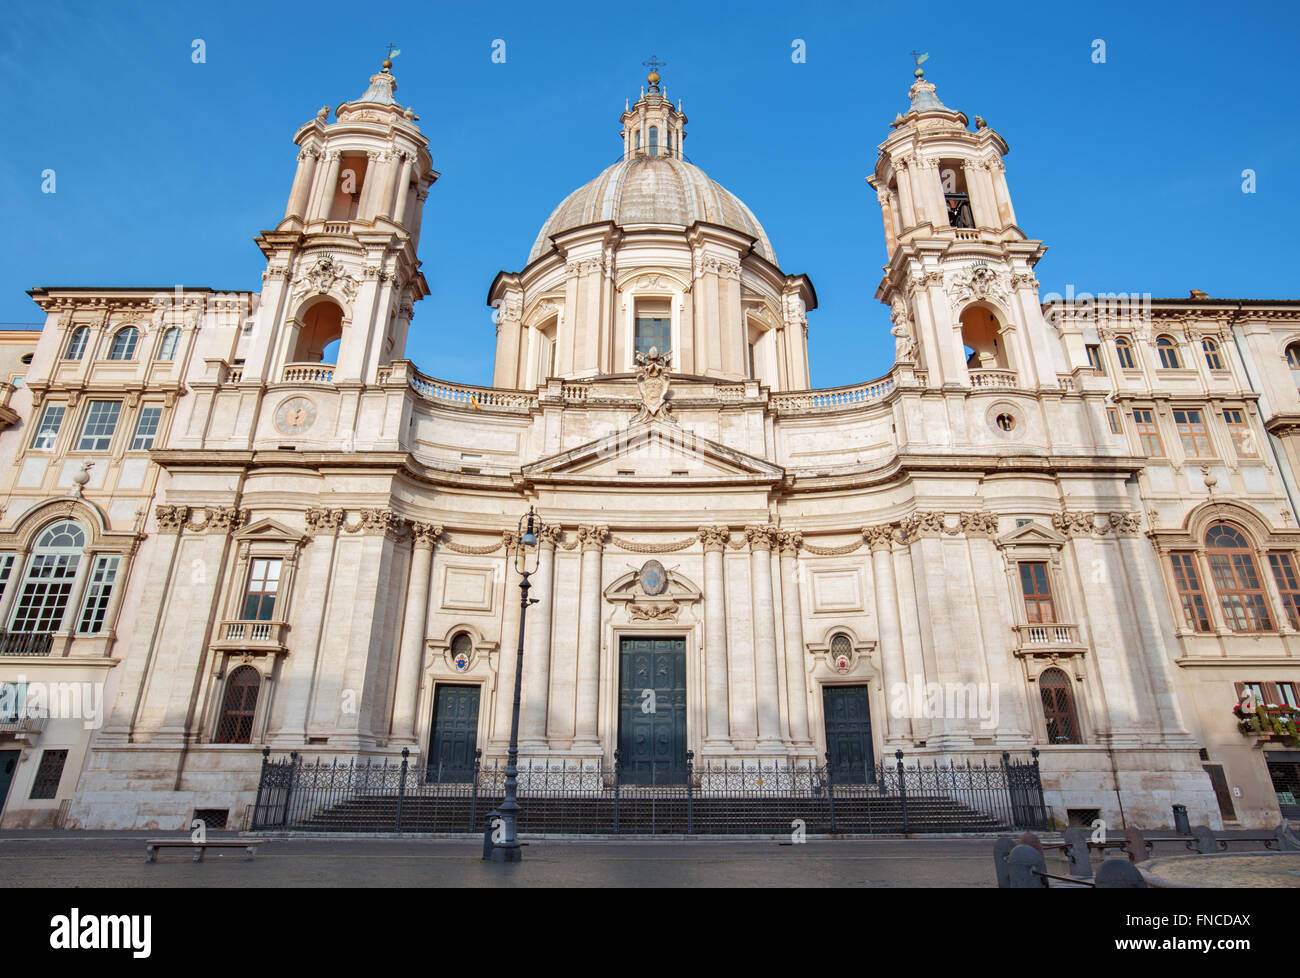 Rome - Piazza Navona and baroque Santa Agnese in Agone church in morning light, by architects F. Brromini and G. L. Bernini. Stock Photo